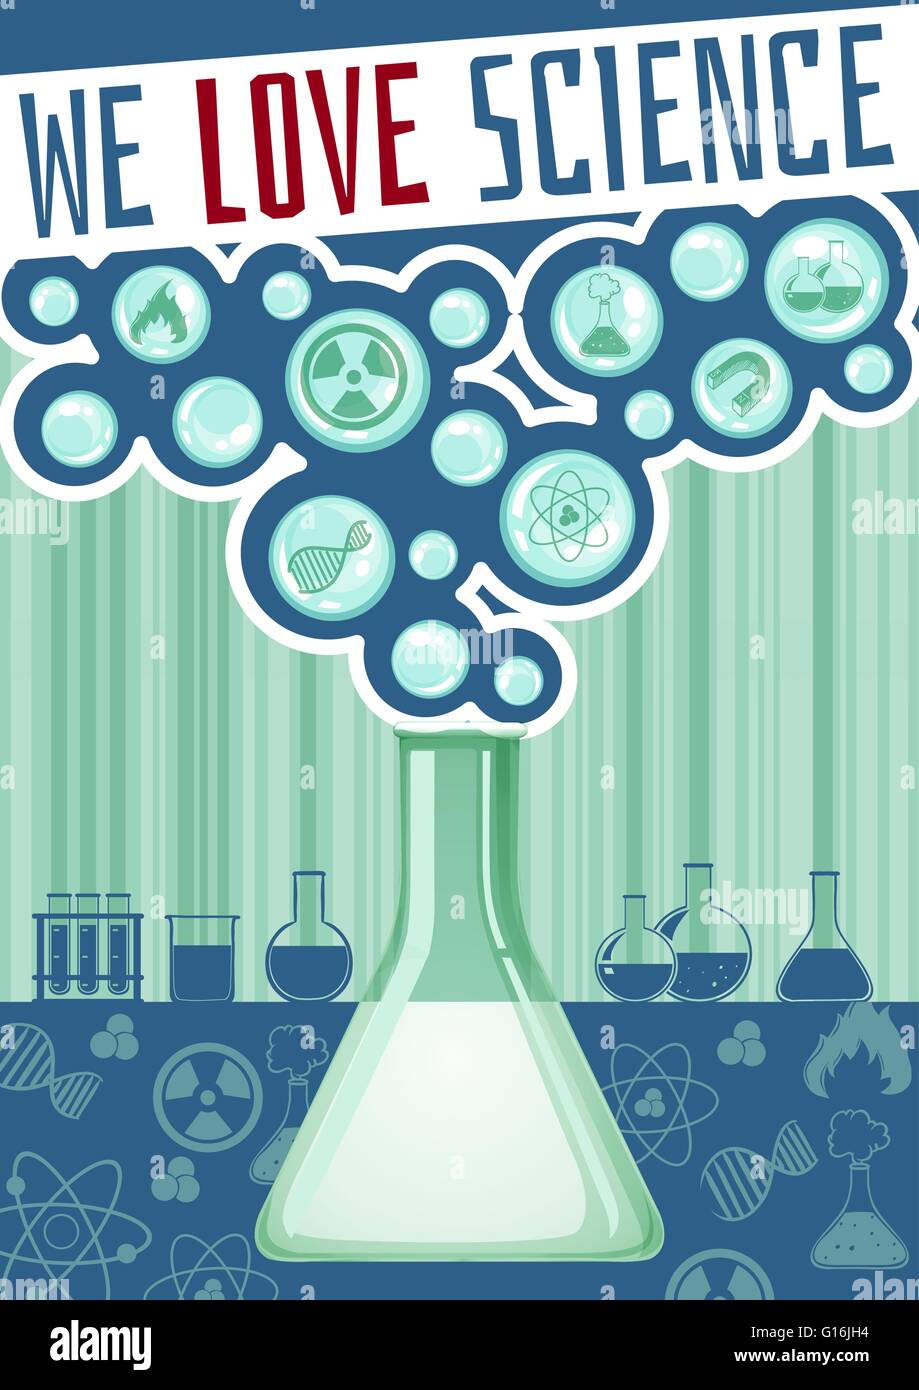 Science poster with lab equipment illustration Stock Vector